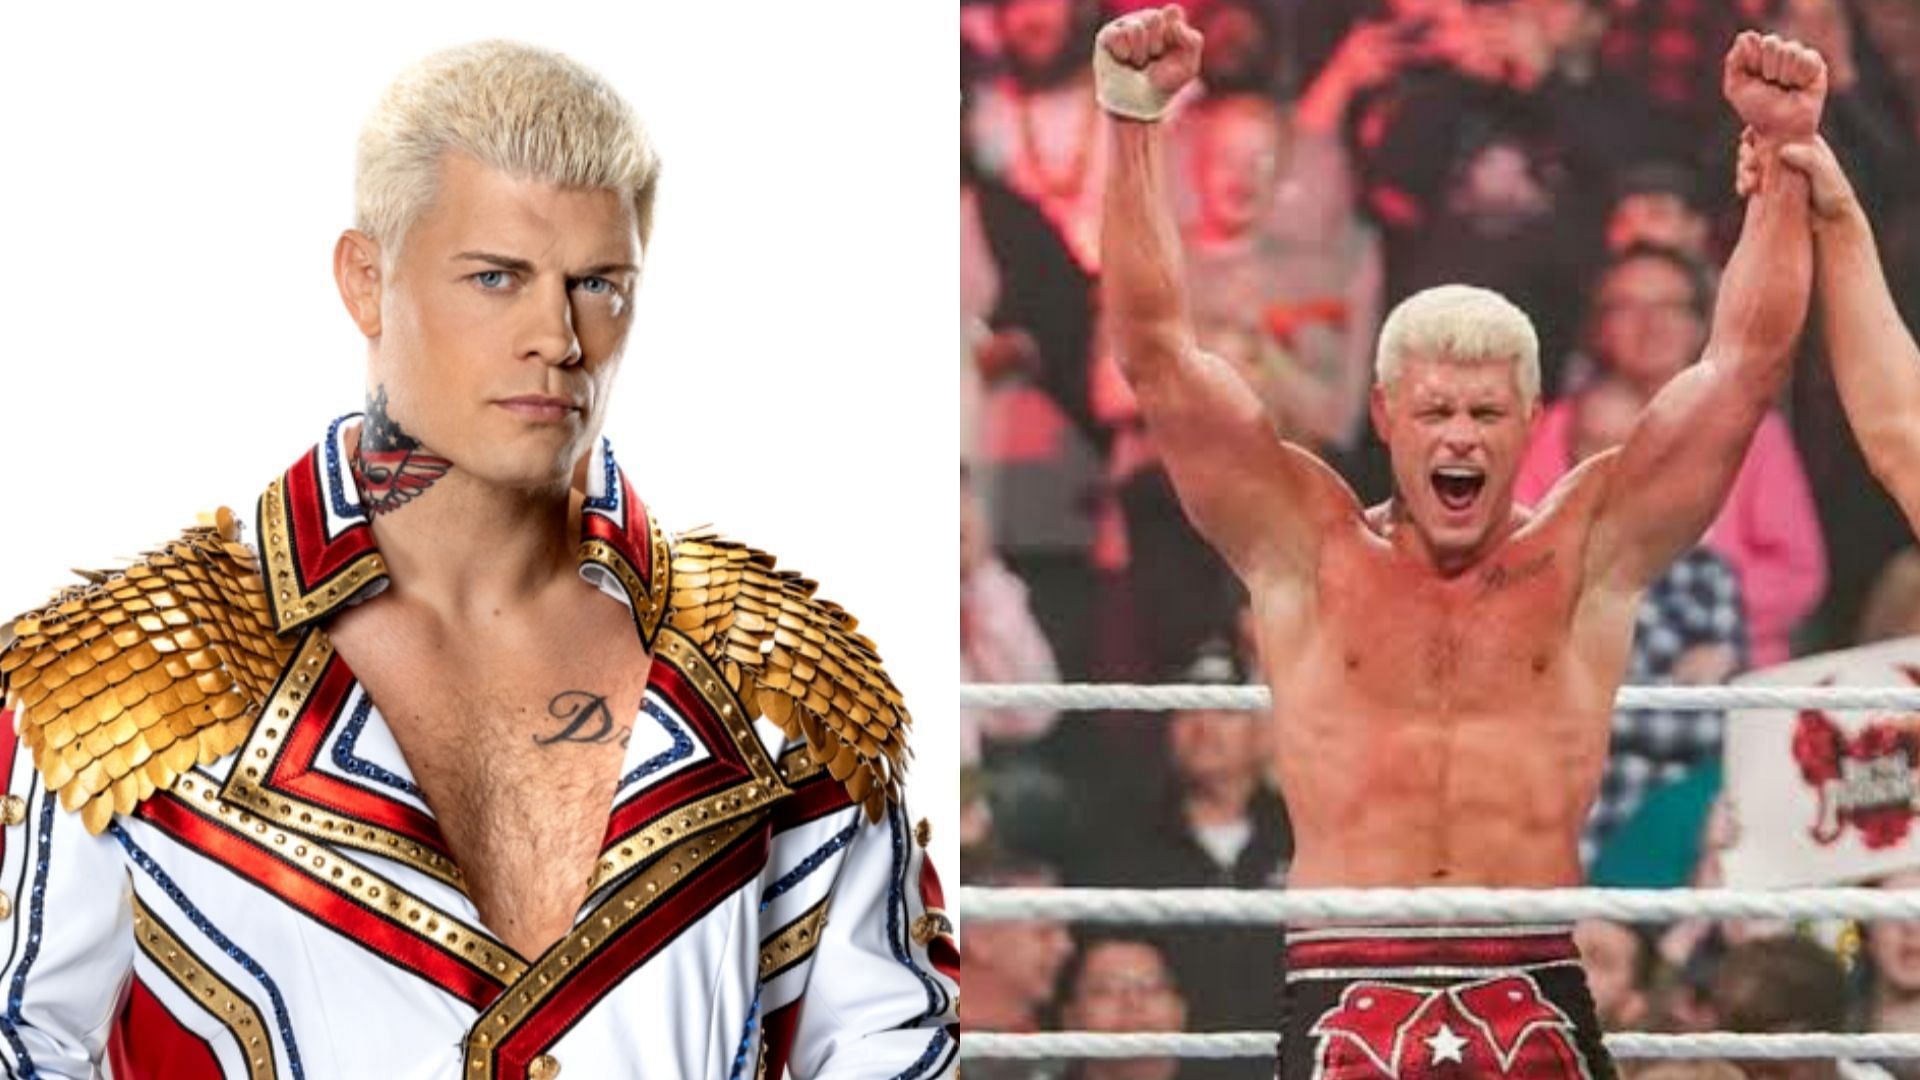 Cody Rhodes will go one-on-one against Ludwig Kaiser on WWE SmackDown tonight.